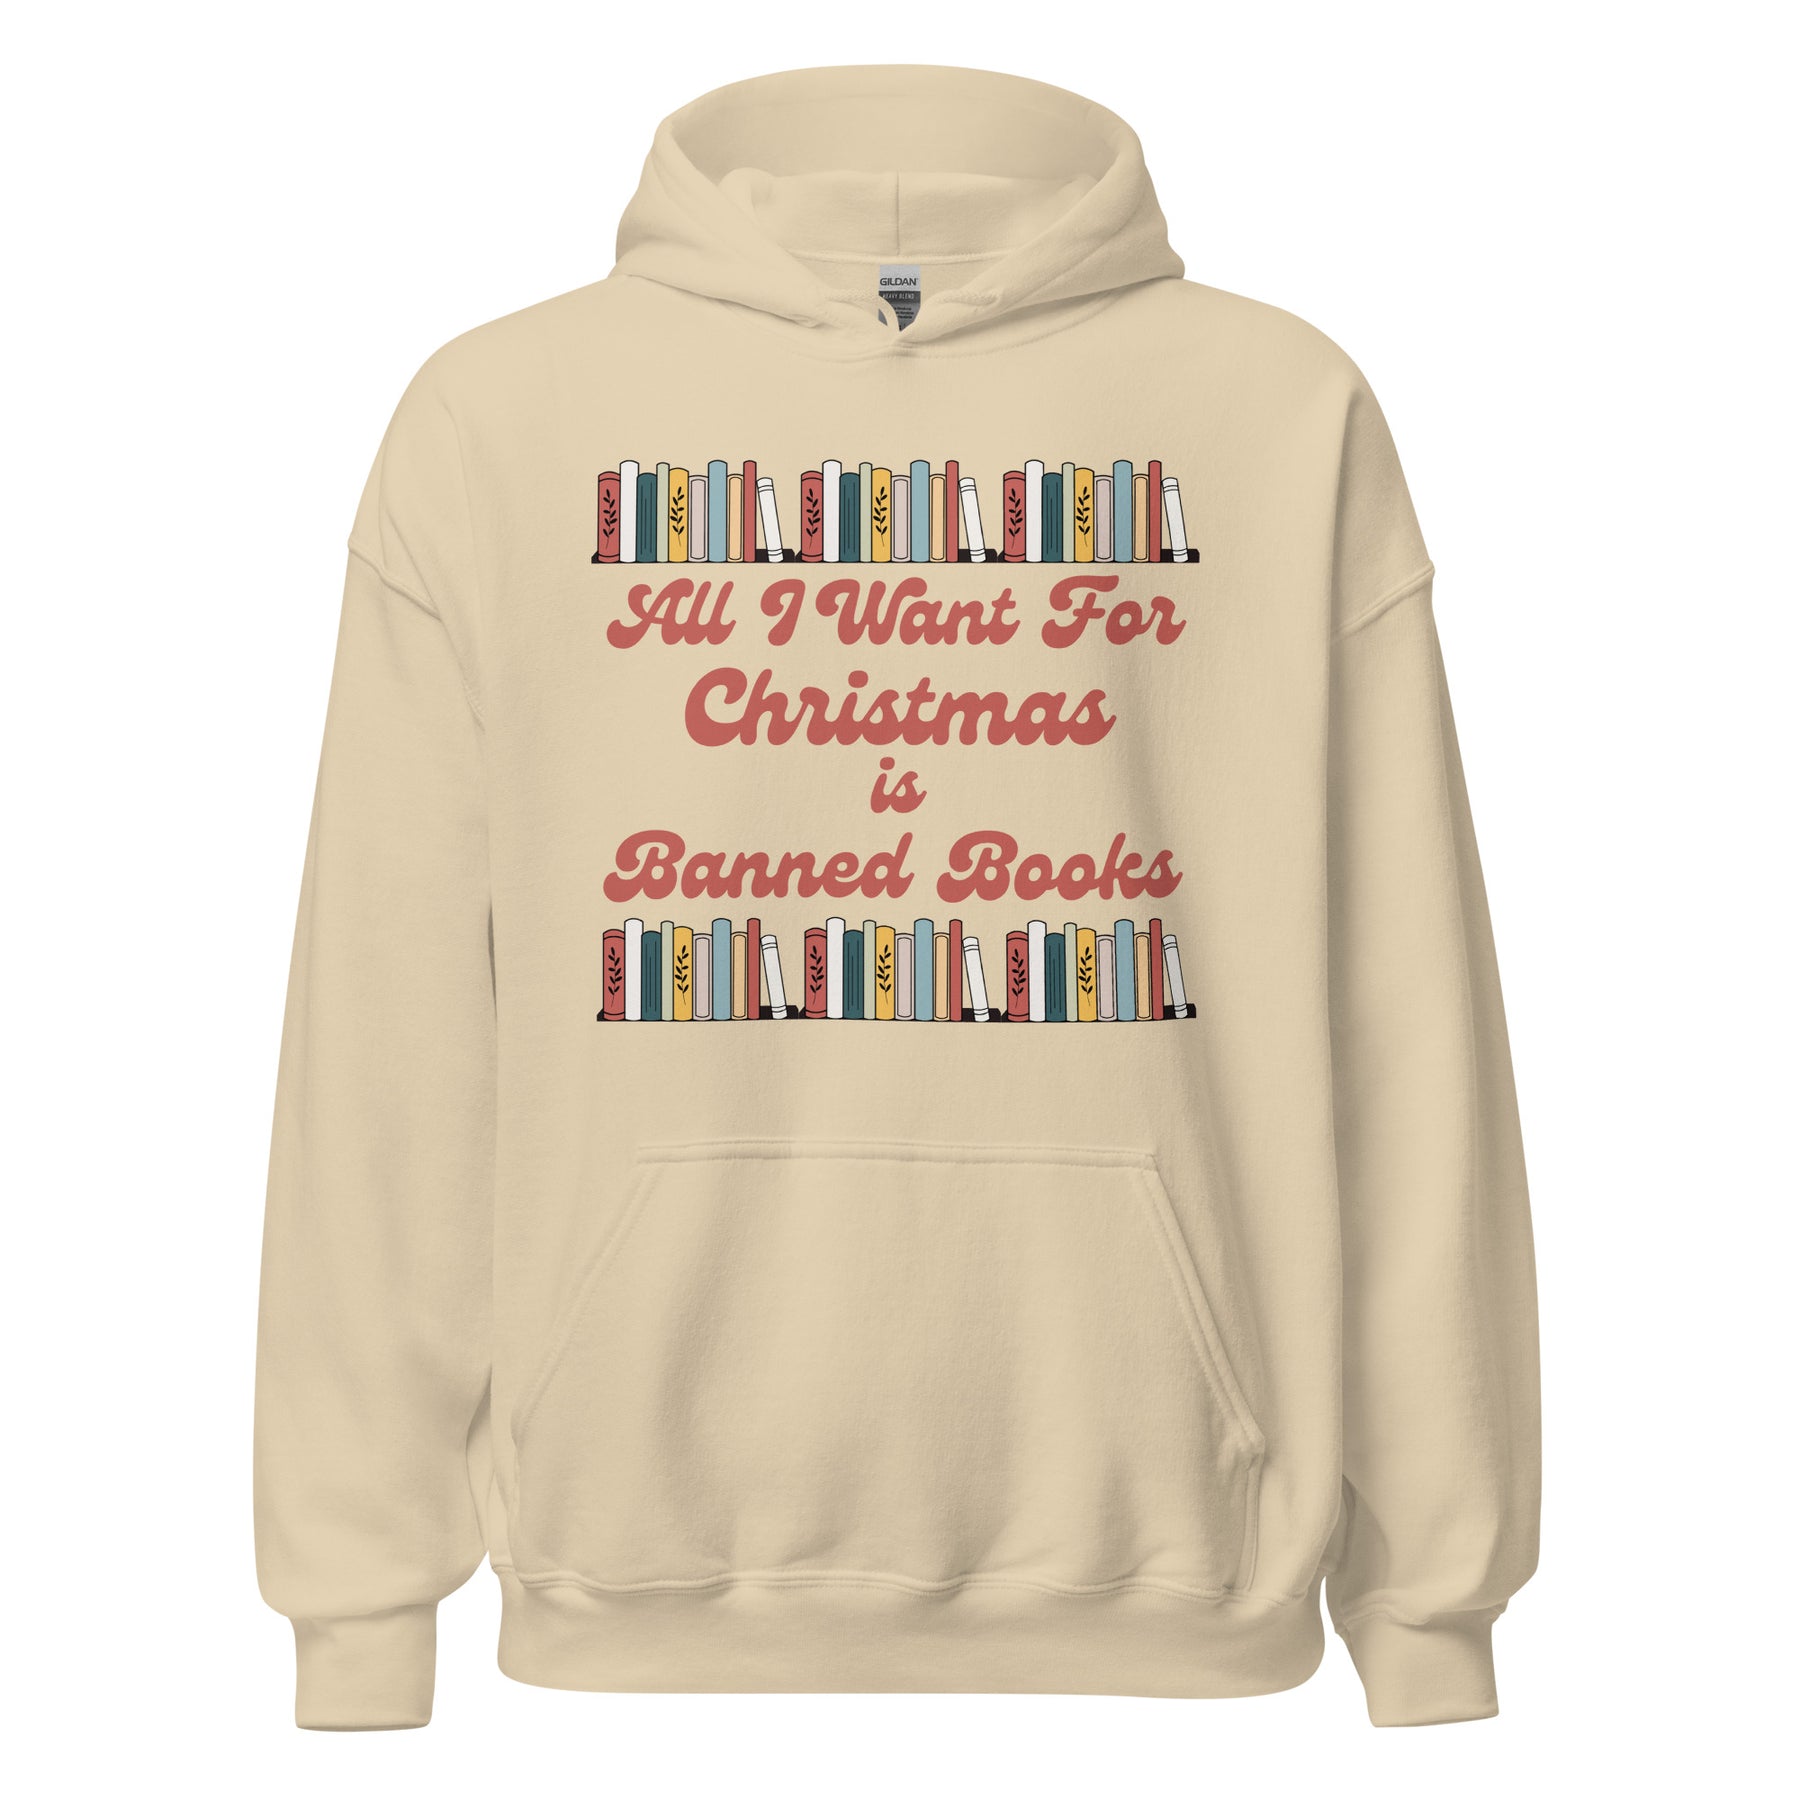 All I Want for Christmas is Banned Books Hoodie